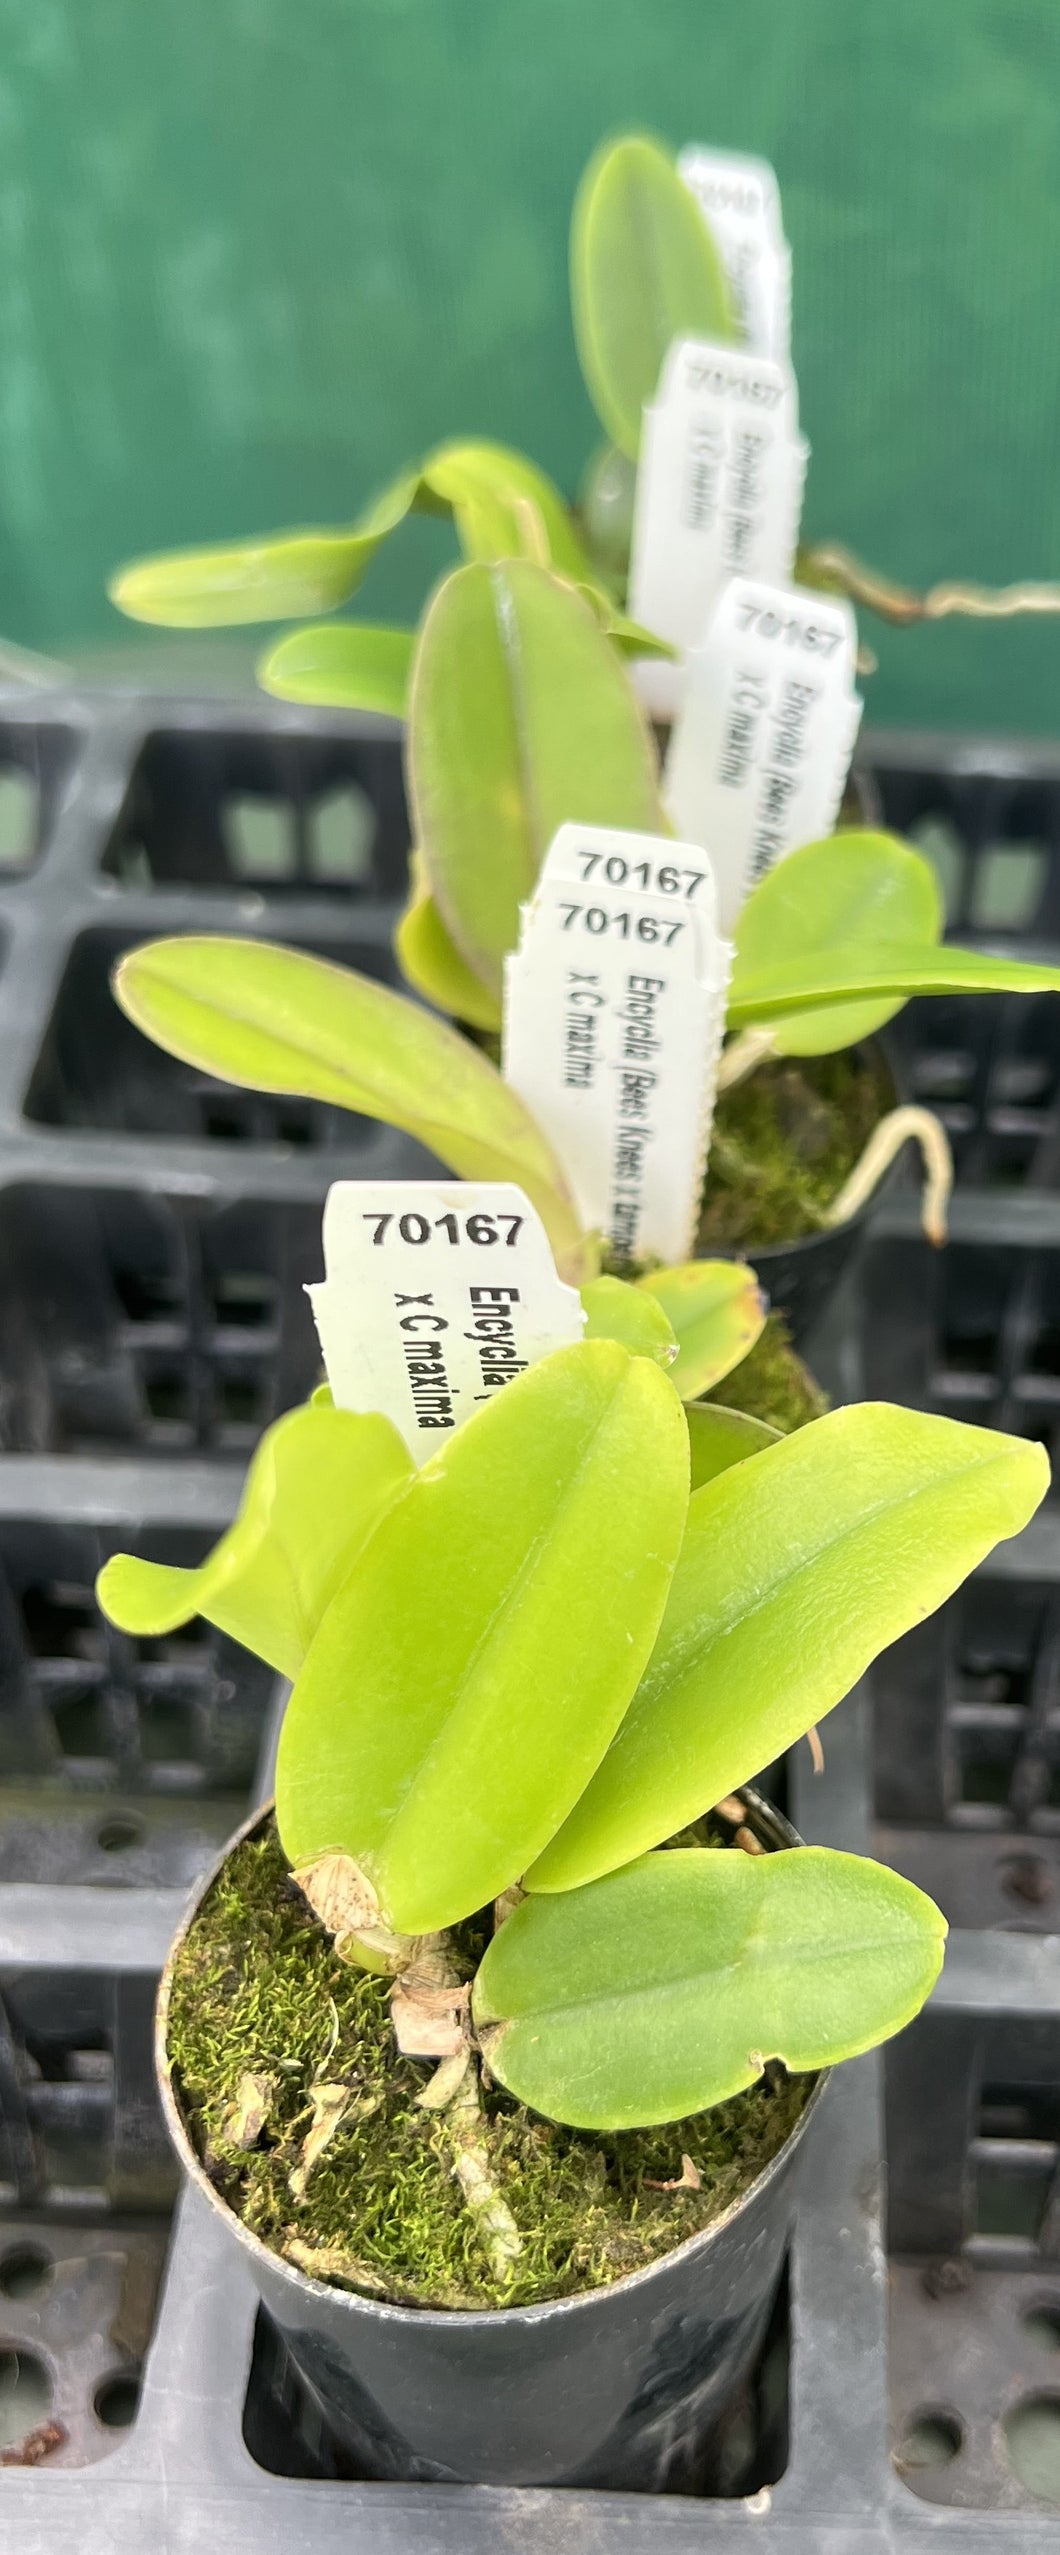 Orchid Seedling  50mm Pot Size - Cattleya Encyclia(Bees Knees x tampensis) x Cattleya maxima